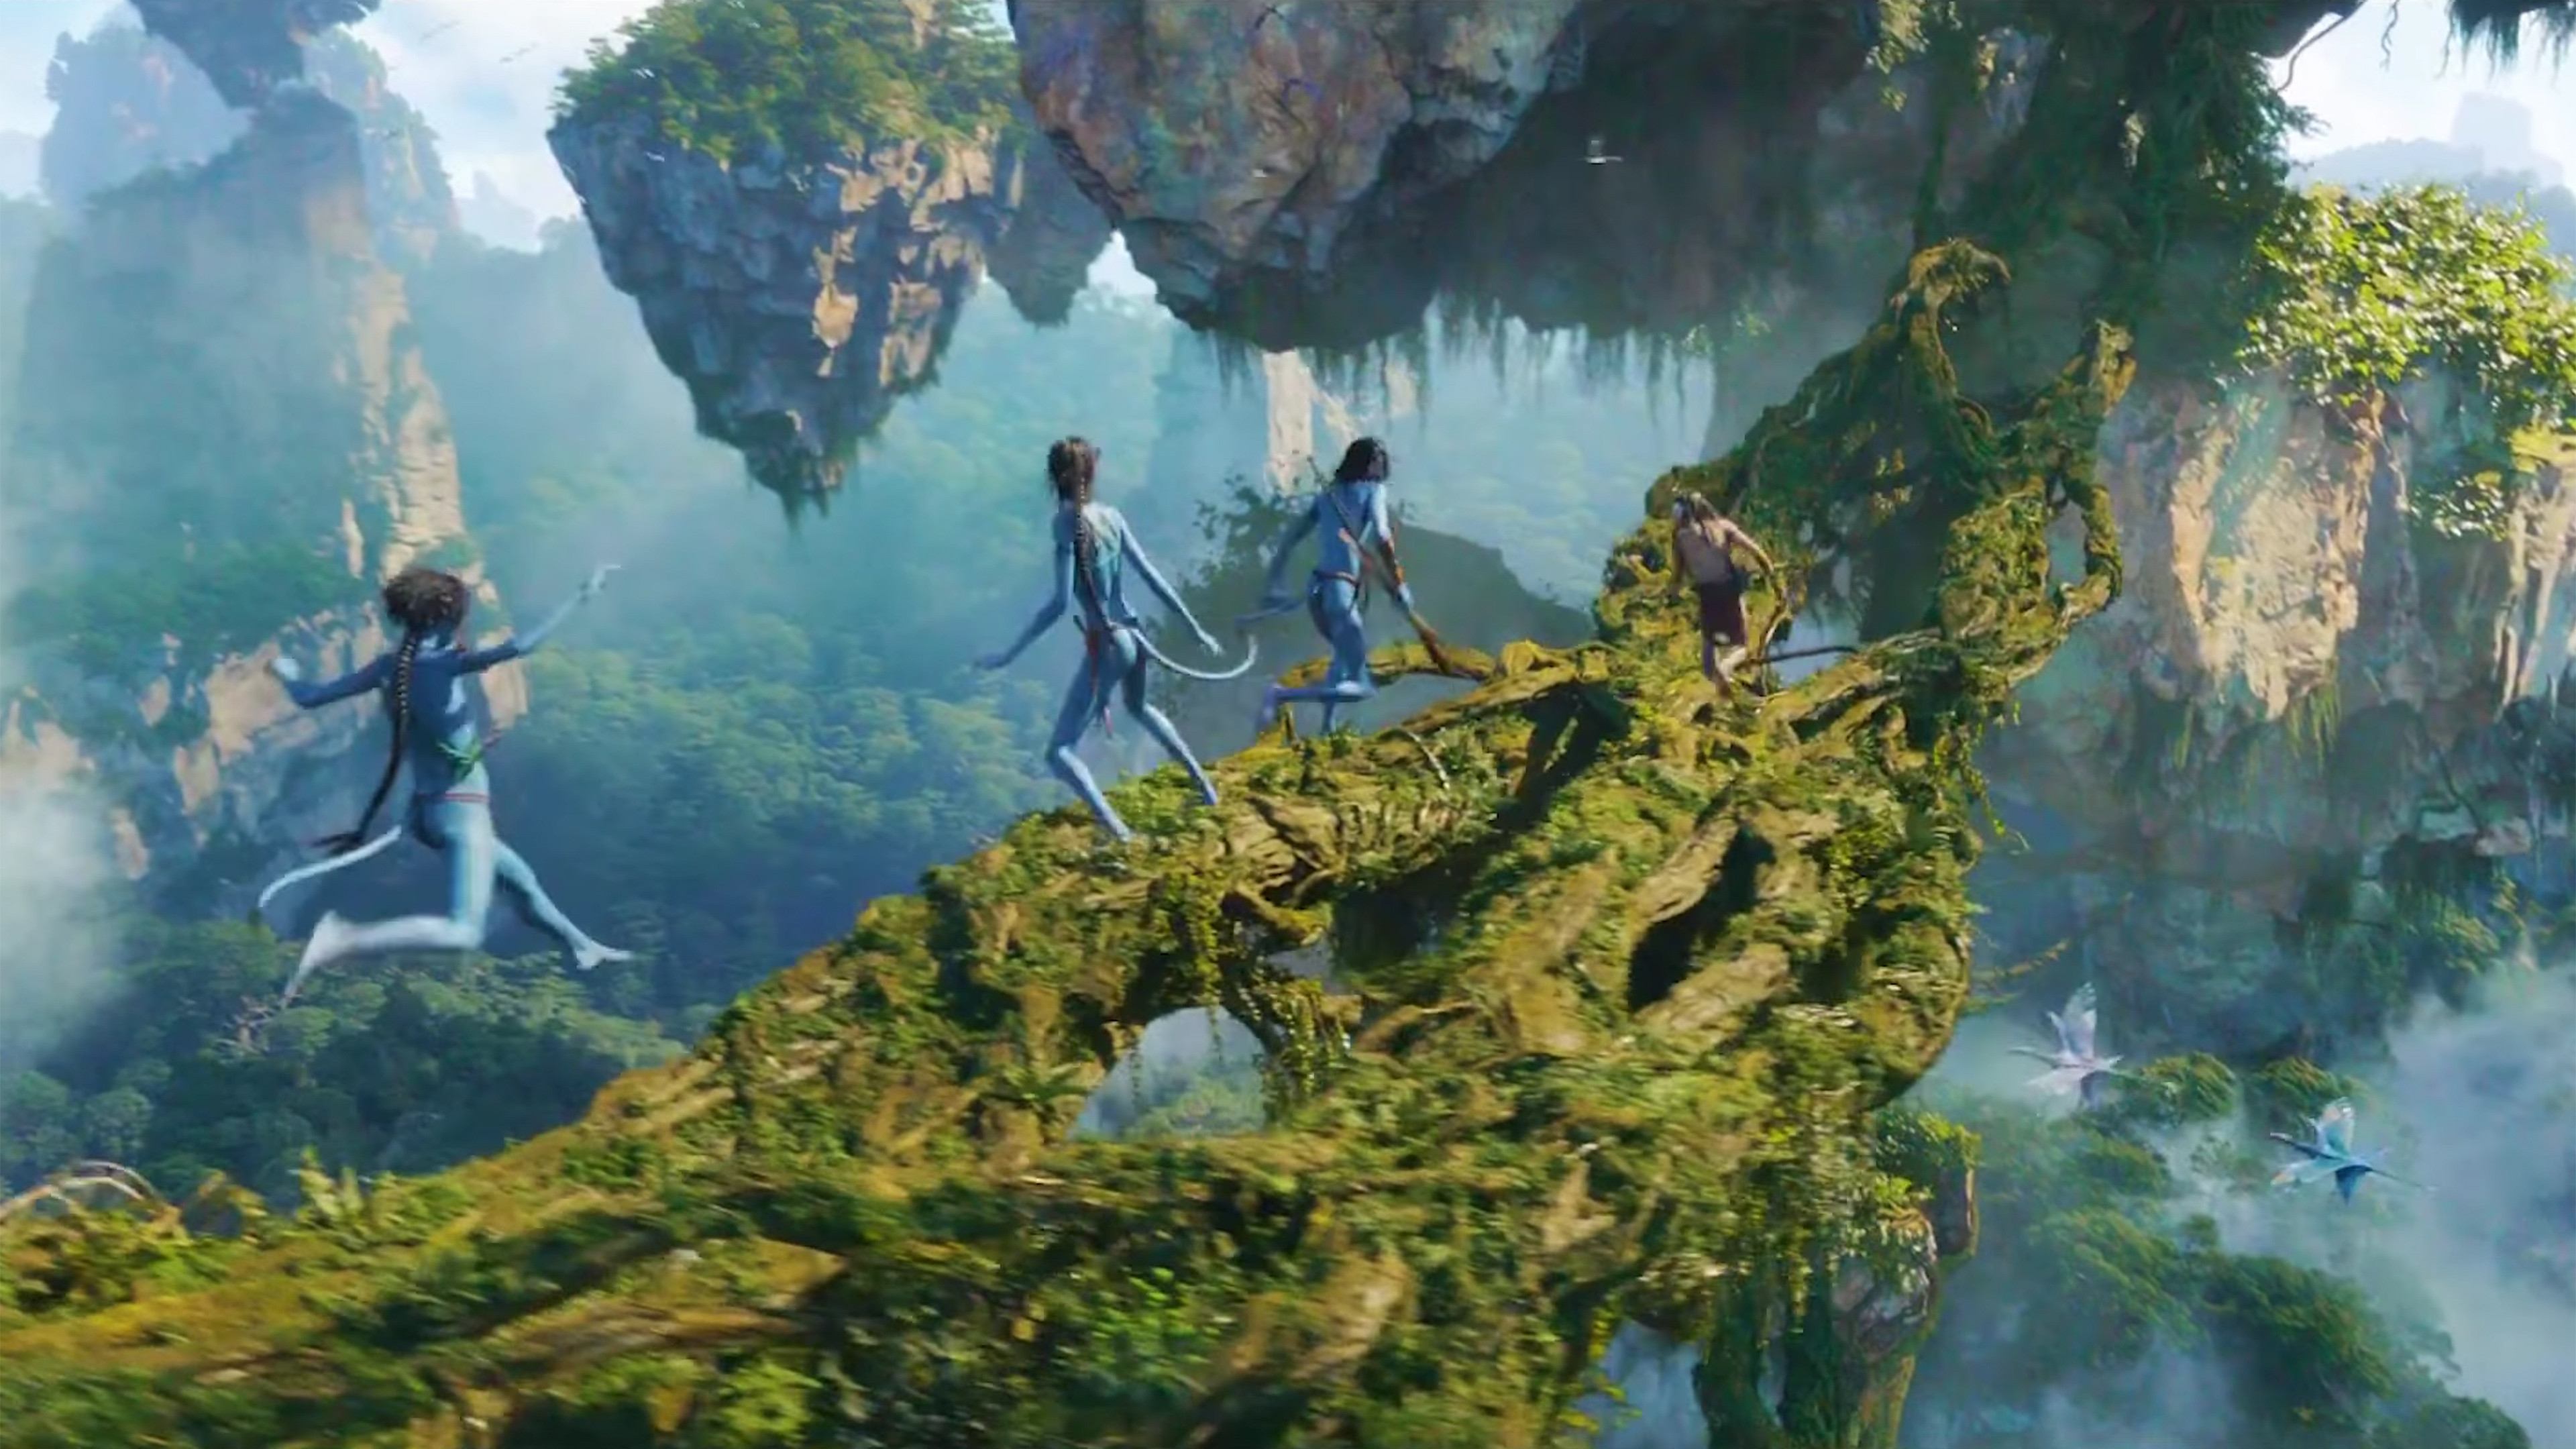 Wallpaper Avatar 2 The Way of Water, 4k, trailer, Movies #23984